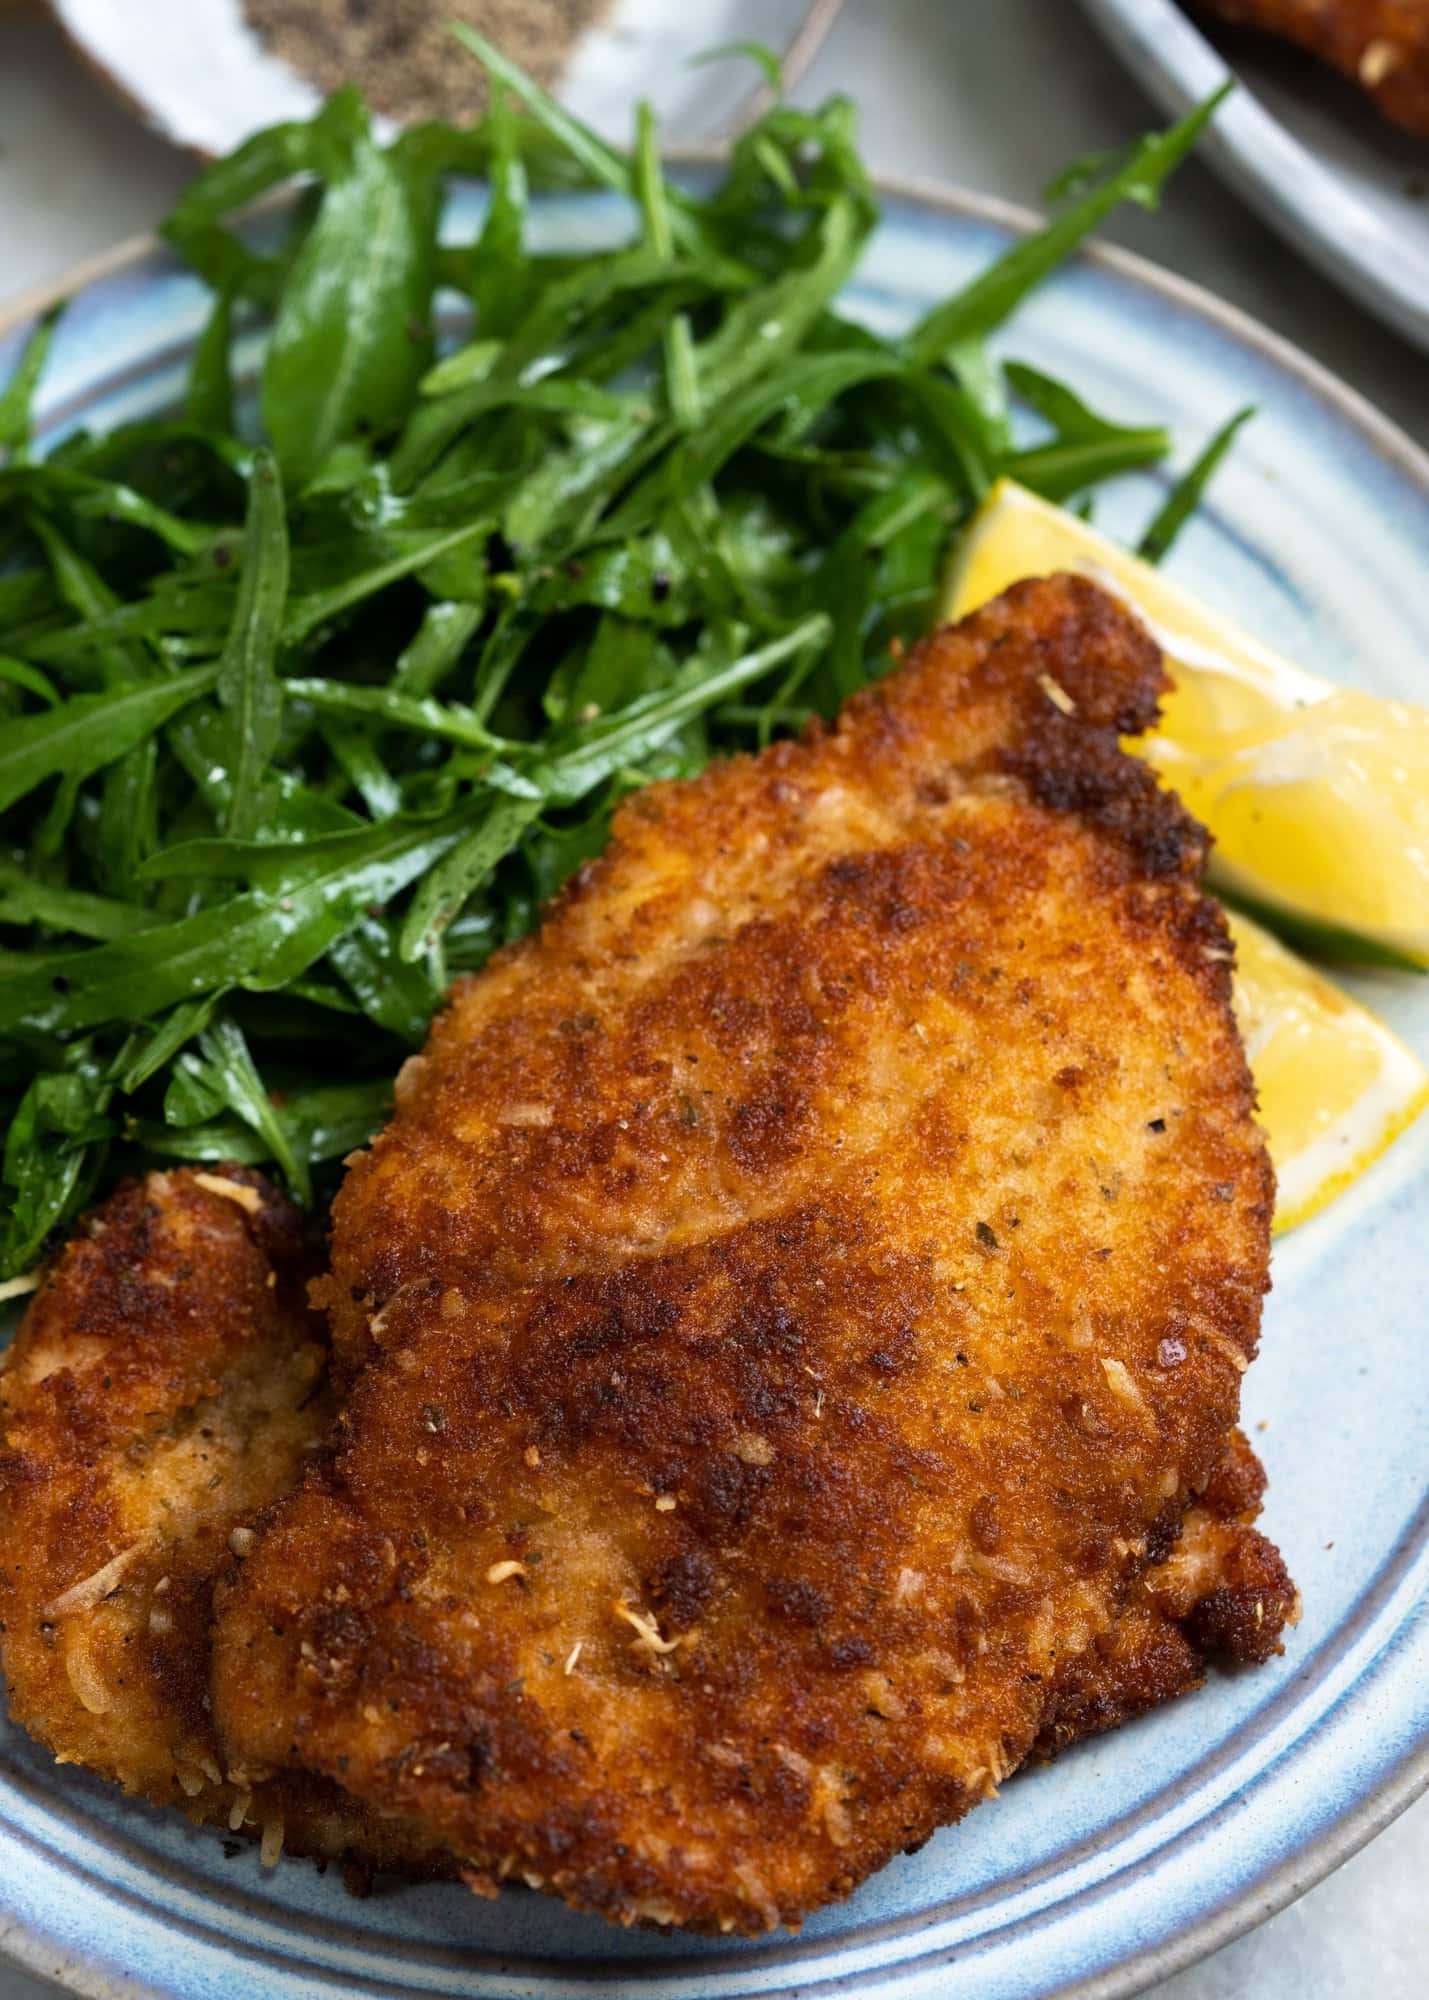 Chicken cutlets with a crisp coating made with Italian seasoning and served with lemon and arugula on a plate.